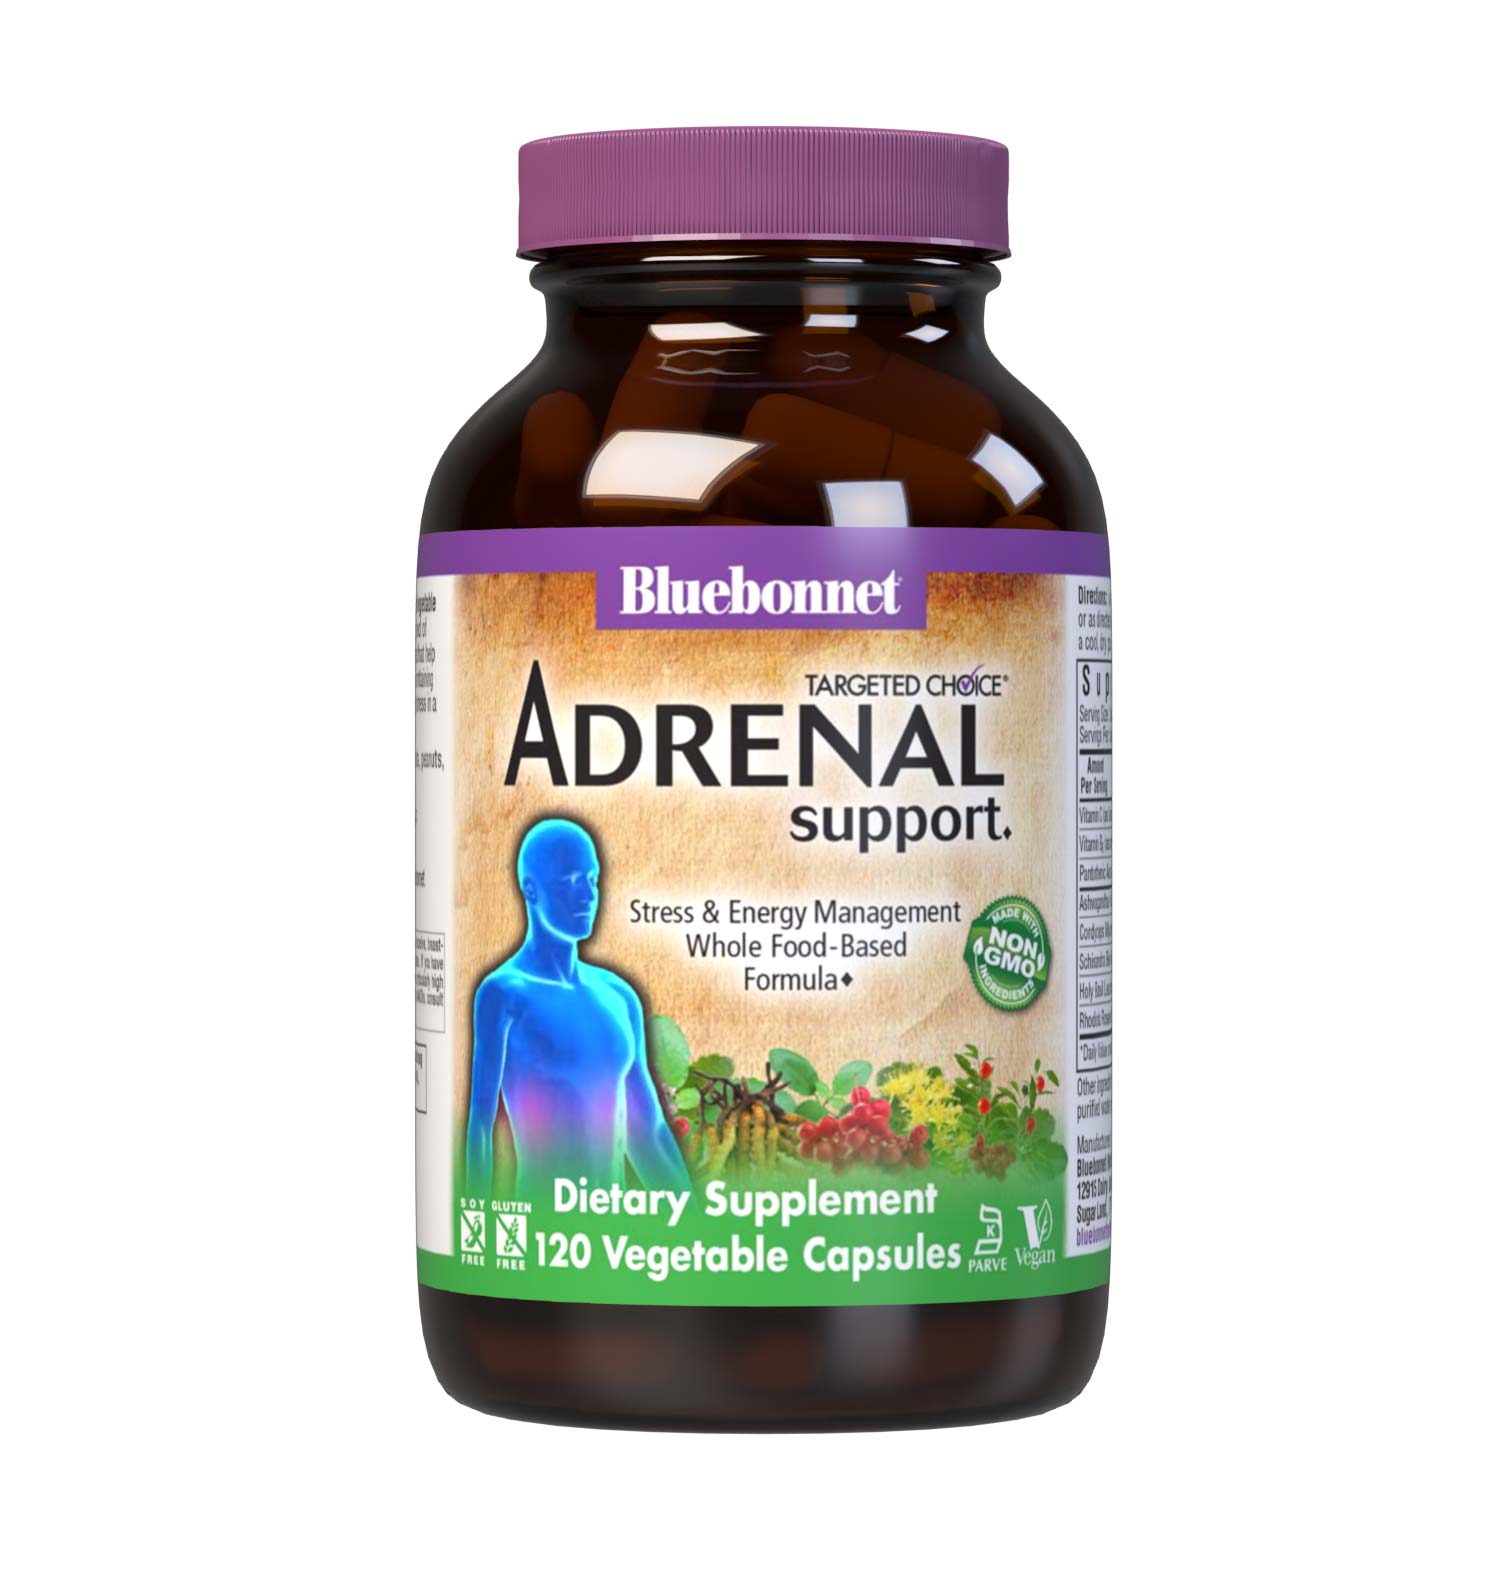 Bluebonnet’s Targeted Choice Adrenal Support 120 Vegetable Capsules are specially formulated with a unique blend of sustainably harvested or wildcrafted herbal extracts that help promote a healthy response to stress while also maintaining healthy energy levels. Essential nutrients important for the normal production of adrenal hormones were also incorporated to optimize adrenal gland function critical to helping the body adapt to stress in a balanced way. #size_120 count